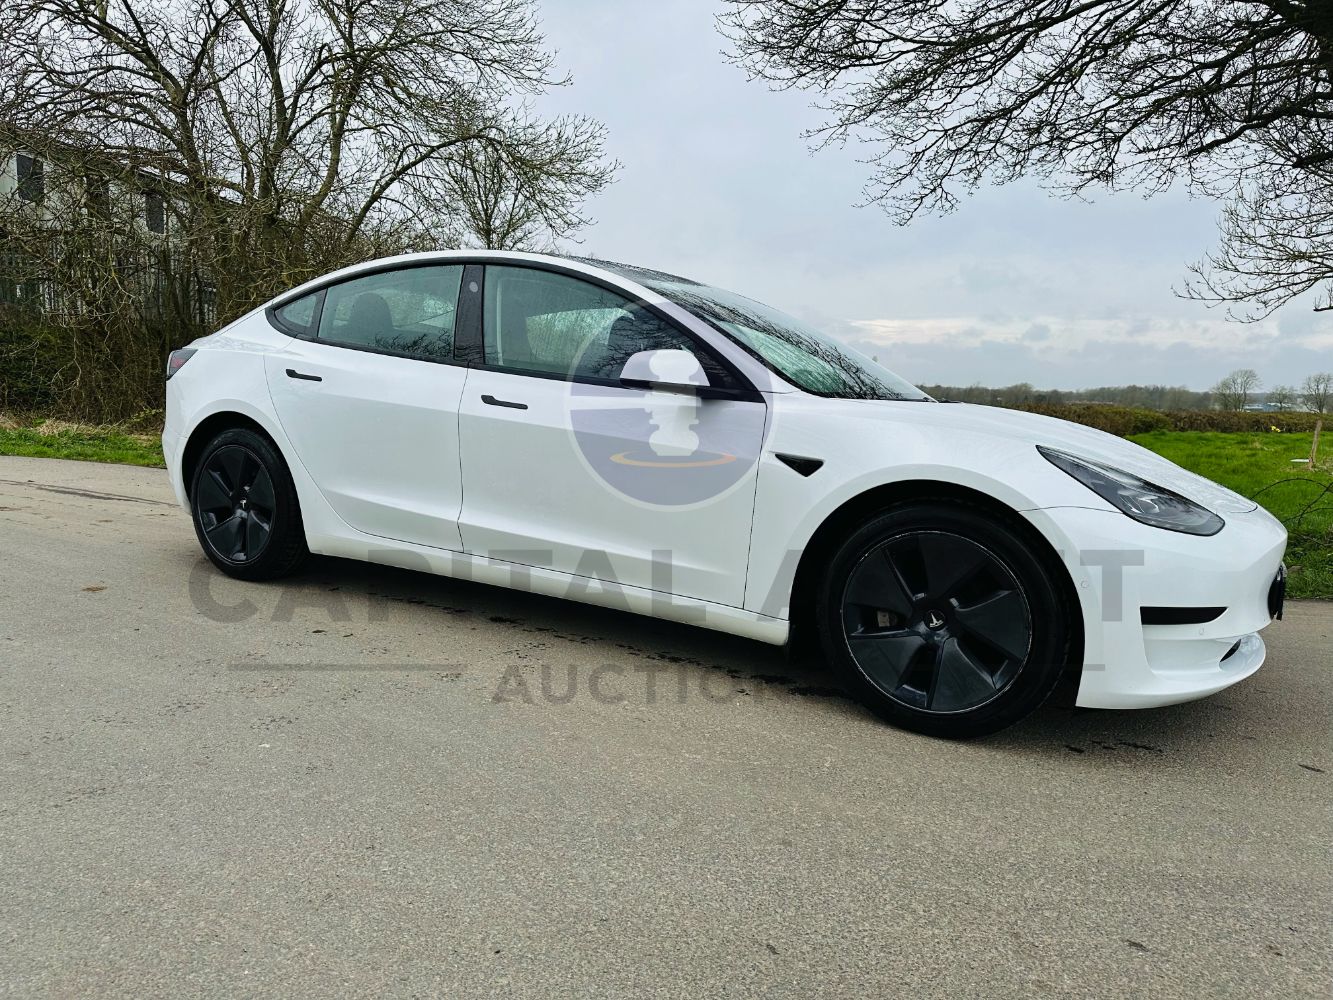 2023 Maxus Delivery 9 - 2021 Ford Transit *LWB Luton Box* - 2021 Tesla Model 3 + Many More: Cars, Commercials & 4x4's ! *Register Now For Free*